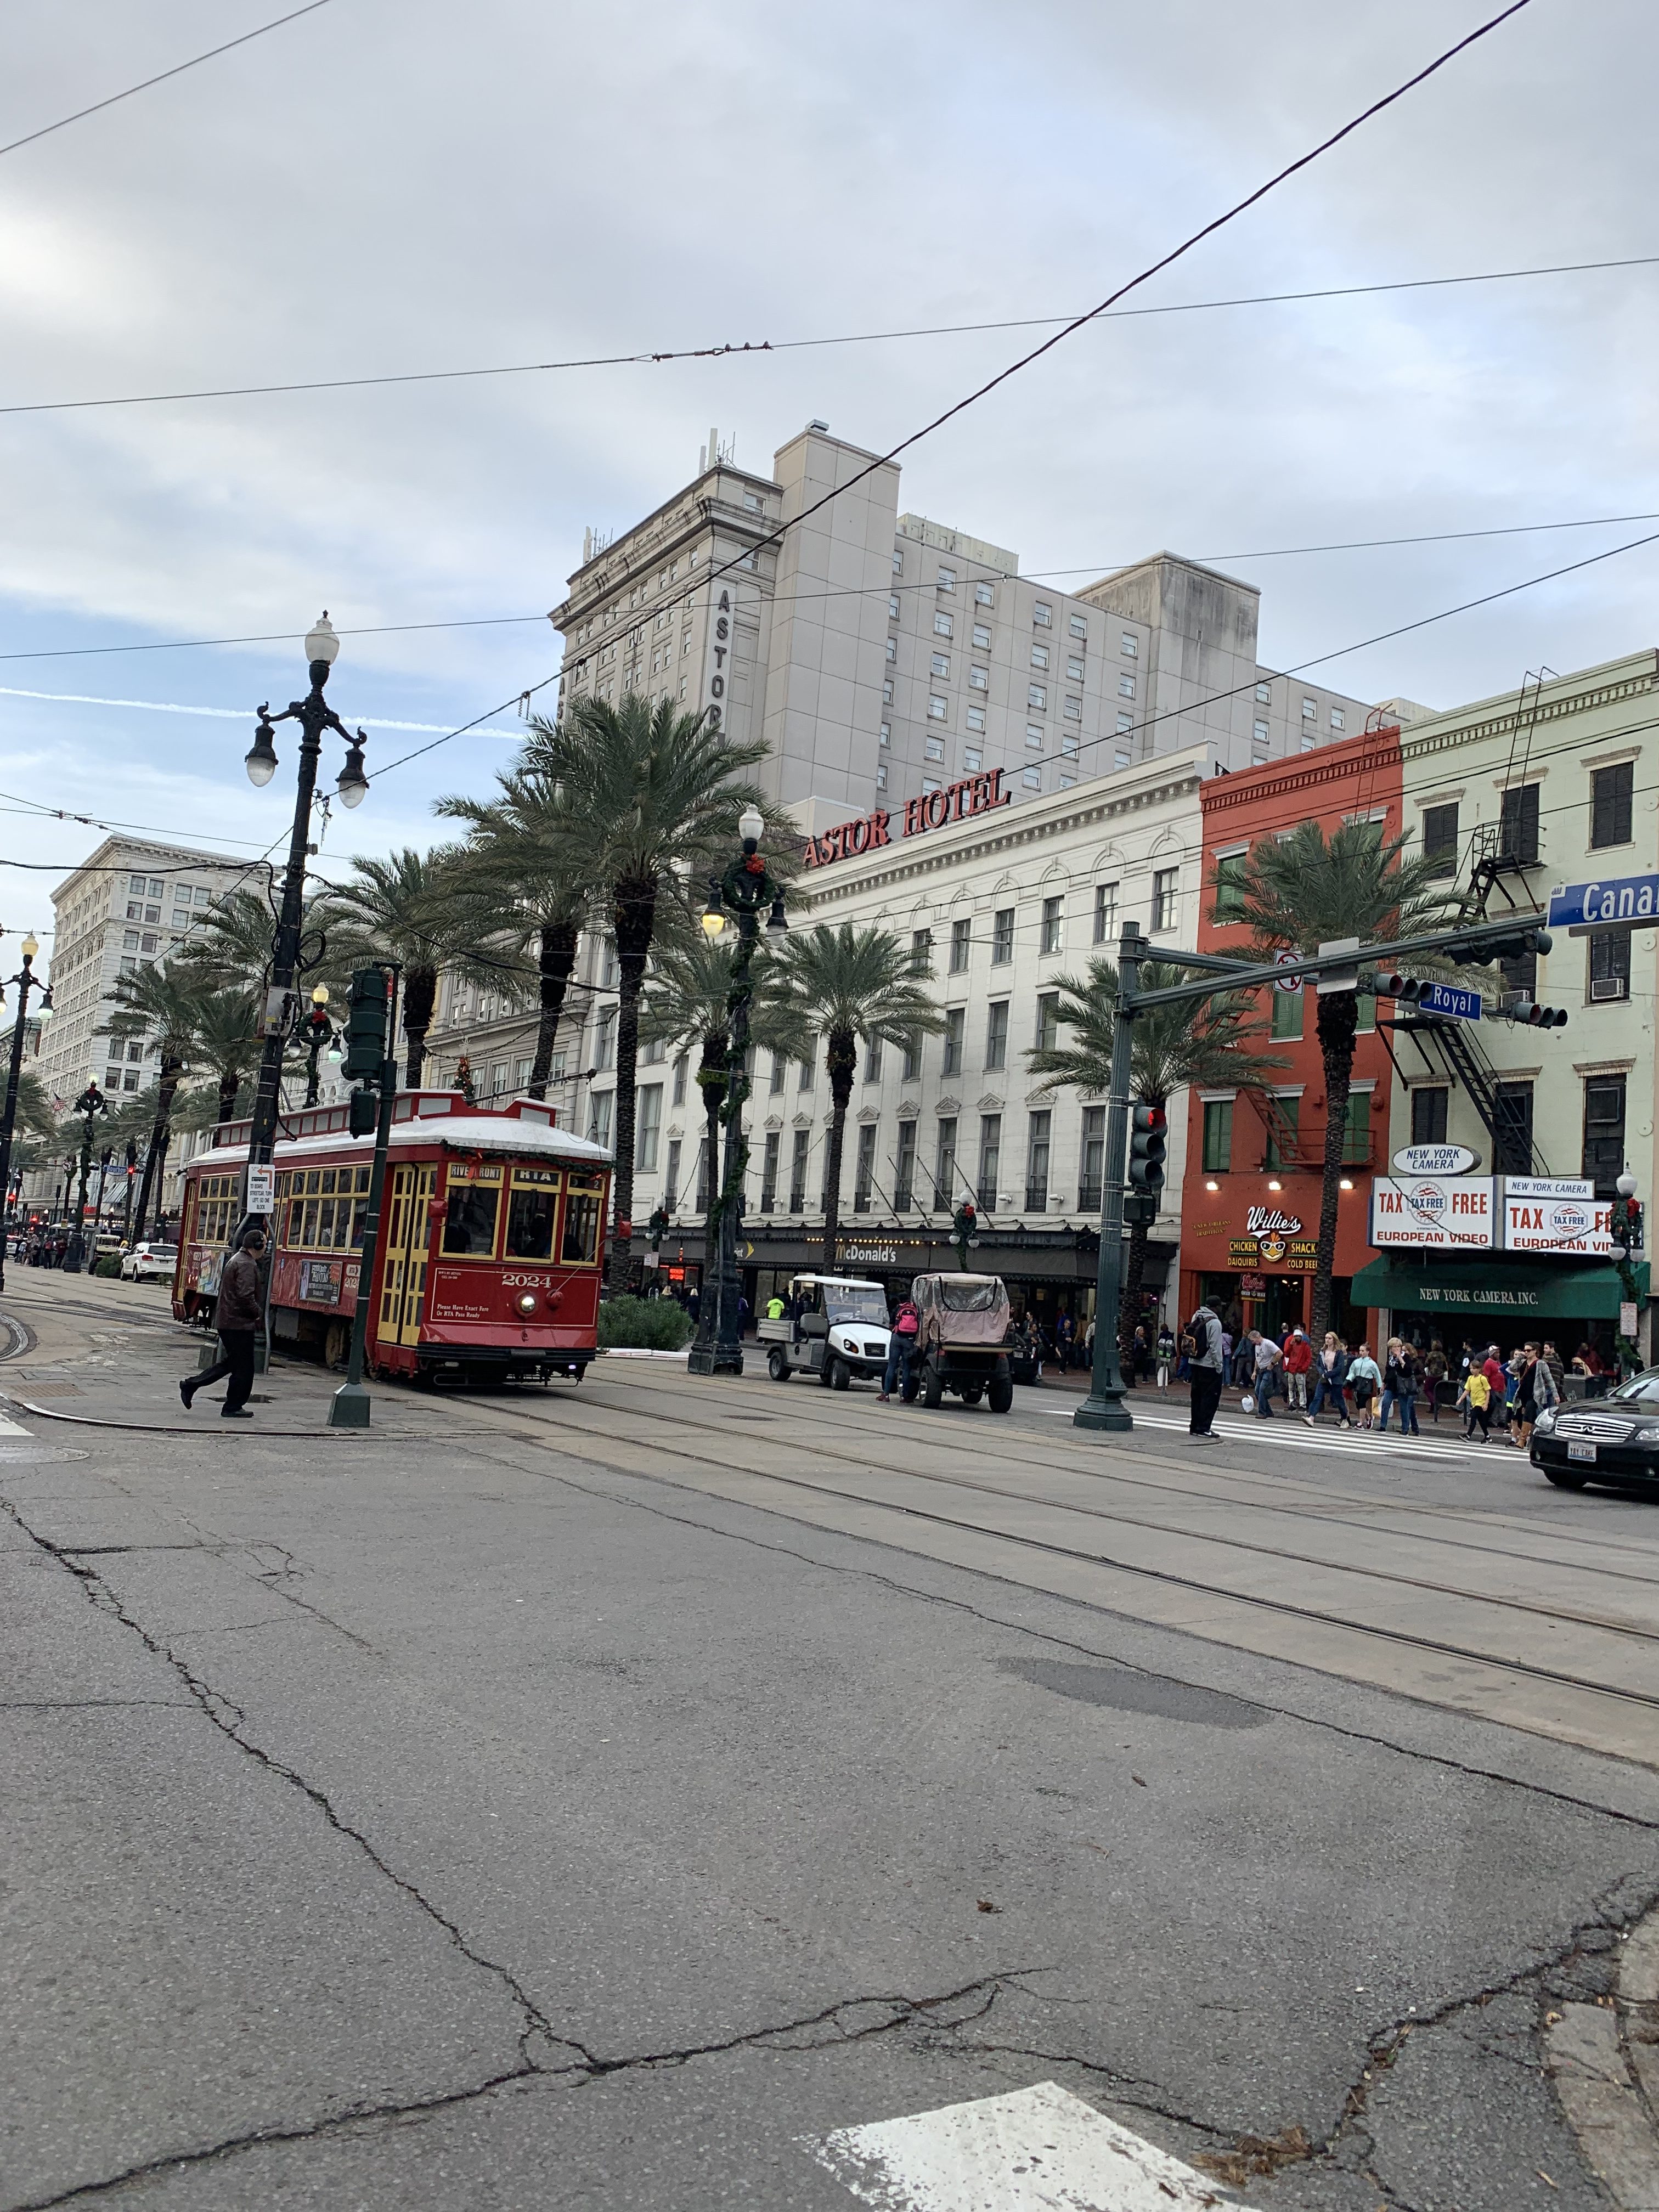 Adventures in Travel: New Orleans